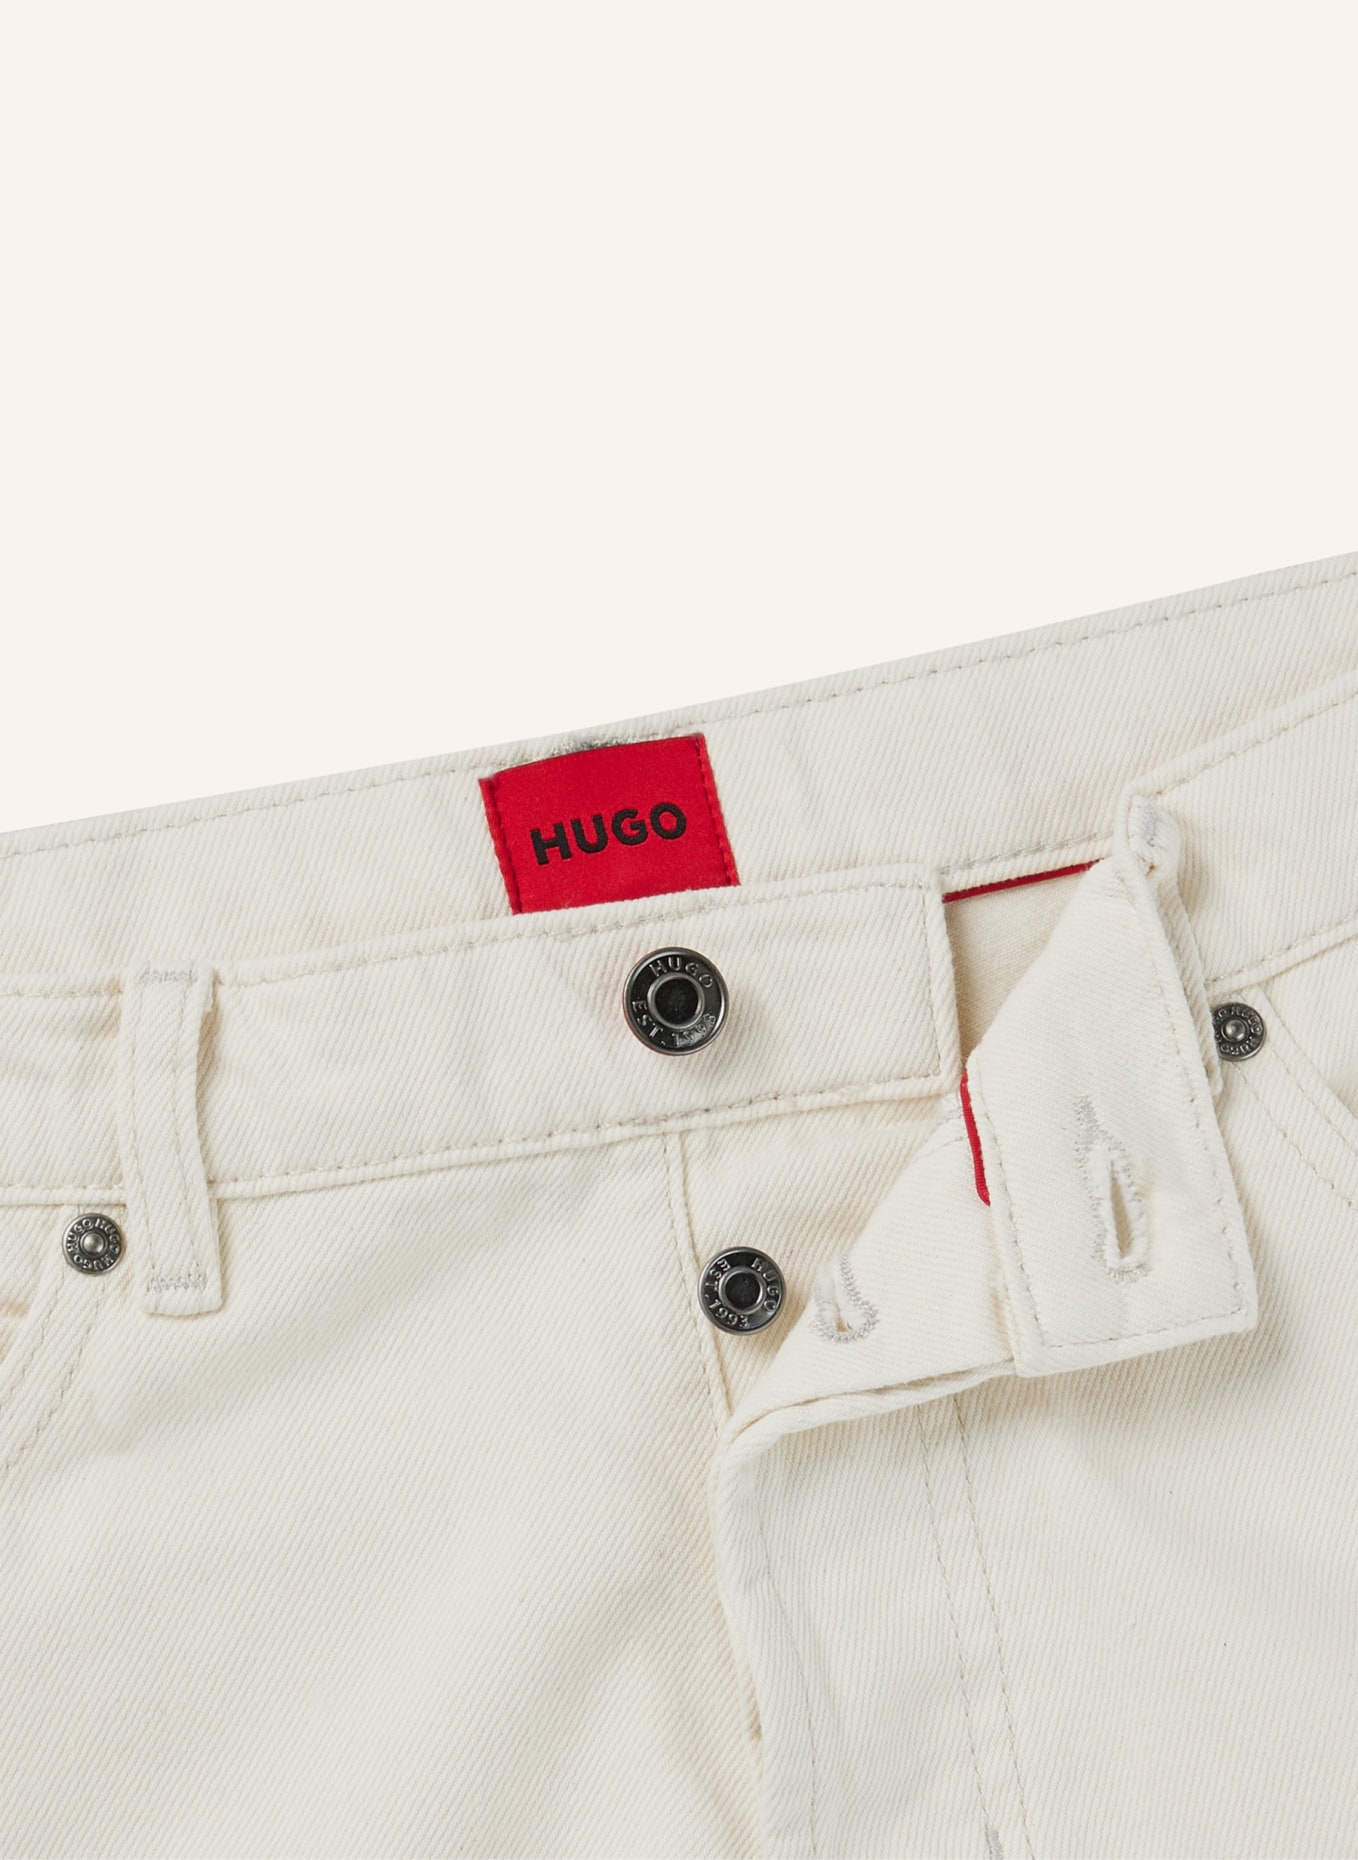 HUGO Jeans HUGO 634 Tapered Fit, Farbe: WEISS (Bild 2)